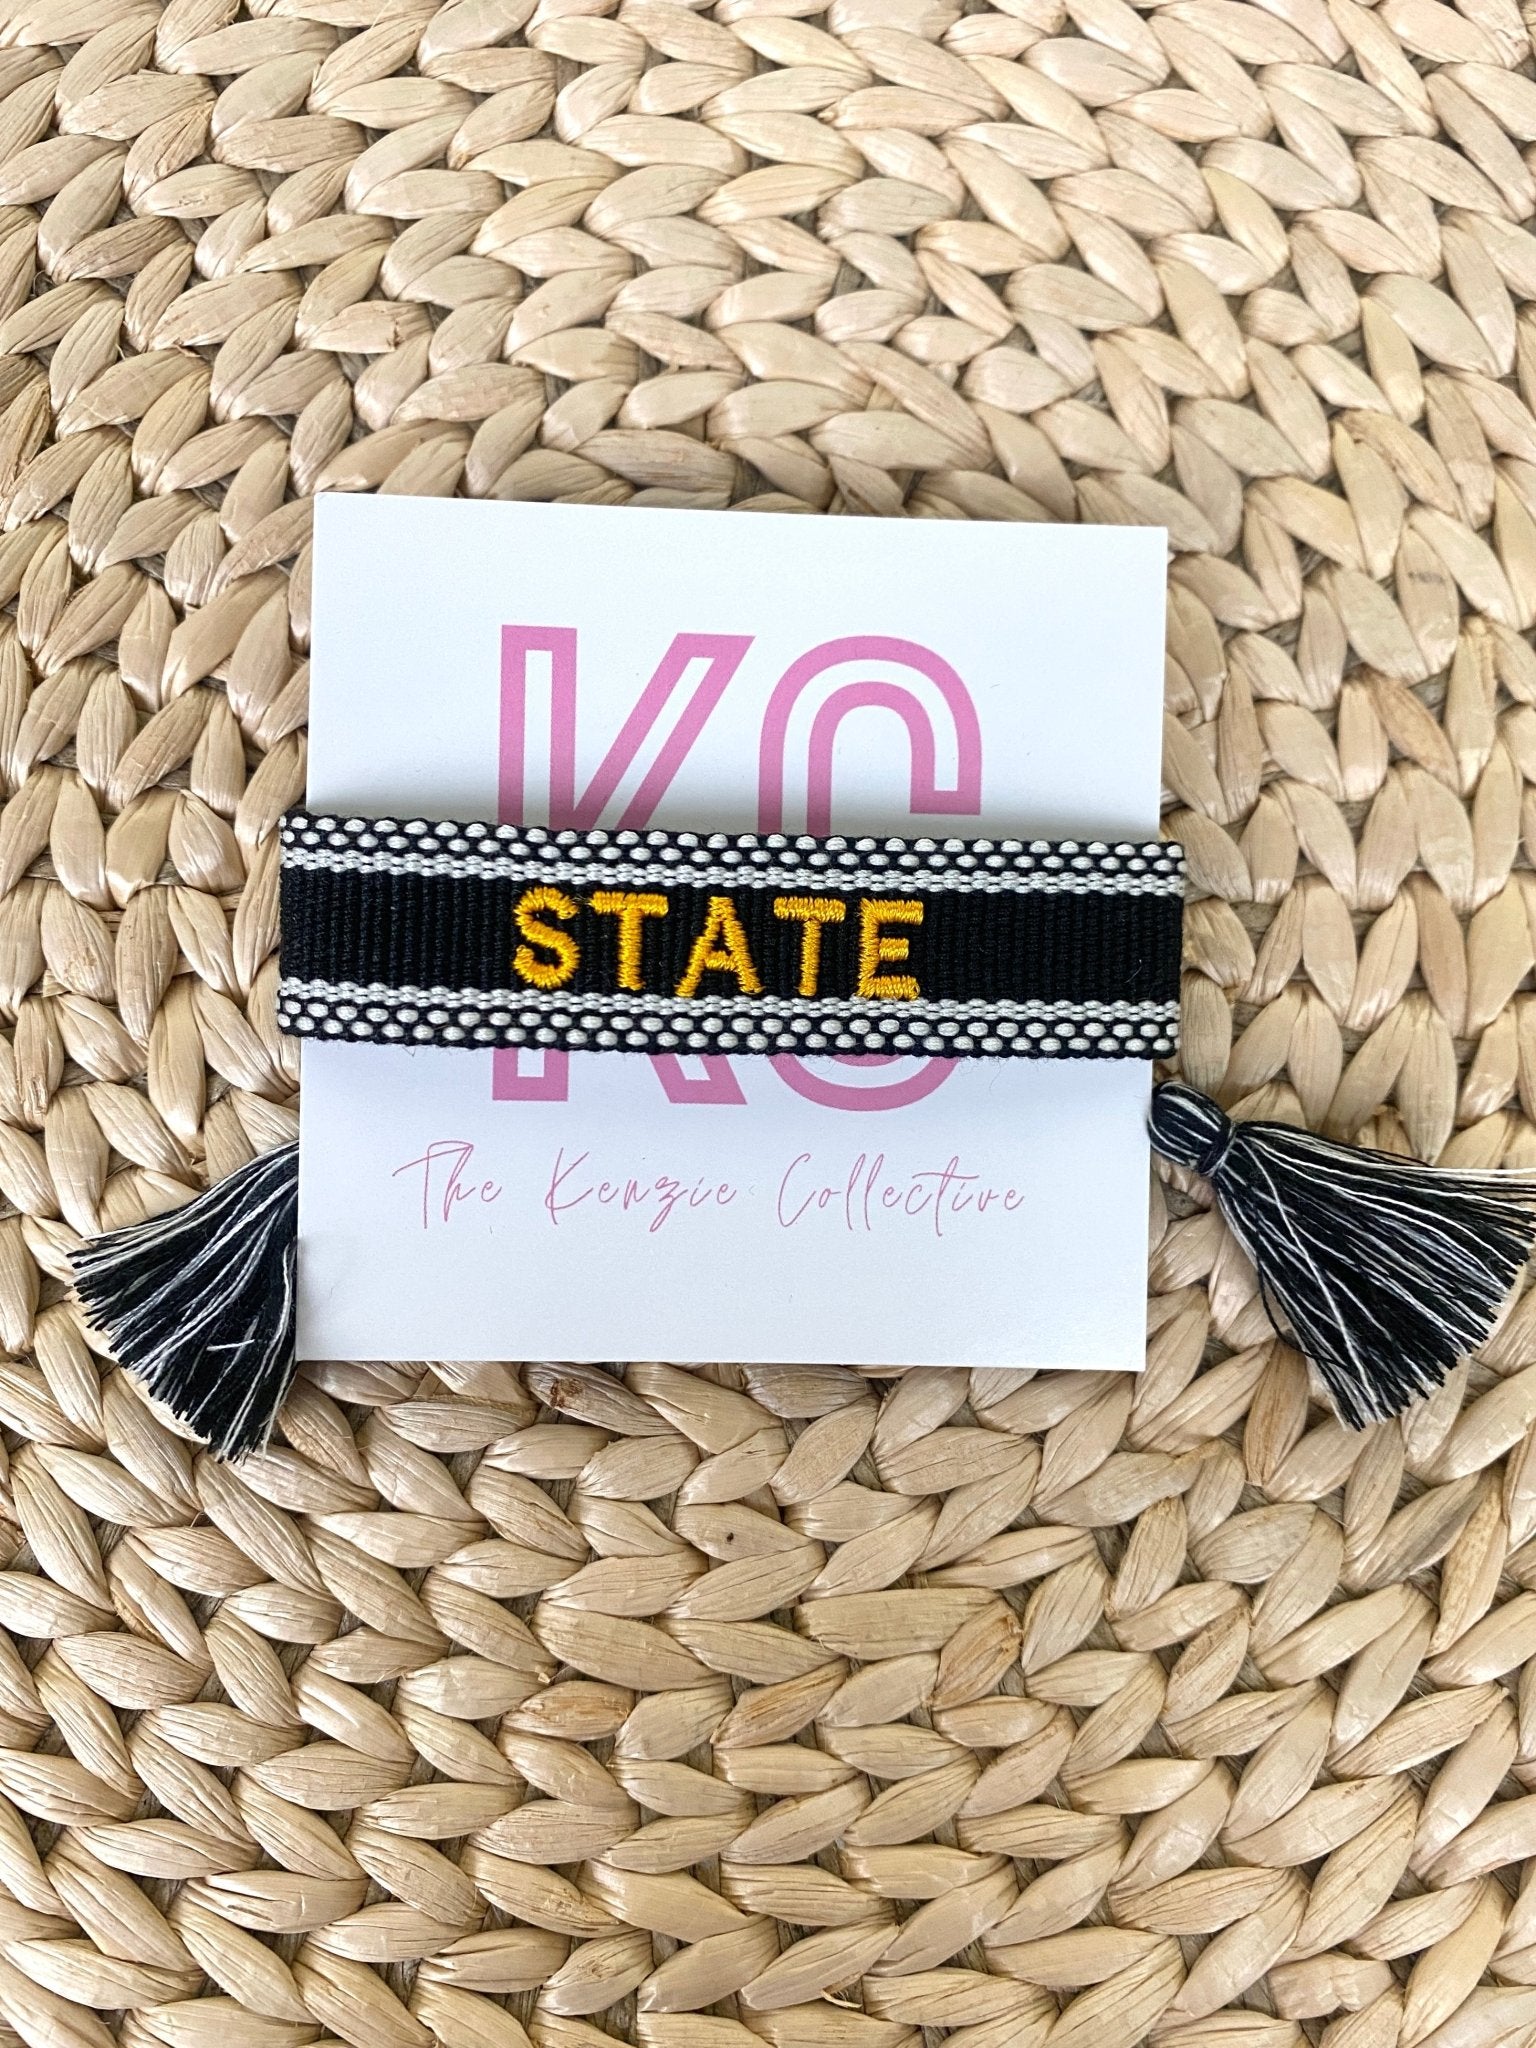 STATE solid tassel bracelet black - Stylish Bracelets - Affordable Jewelry and Belts at Lush Fashion Lounge Boutique in Oklahoma City